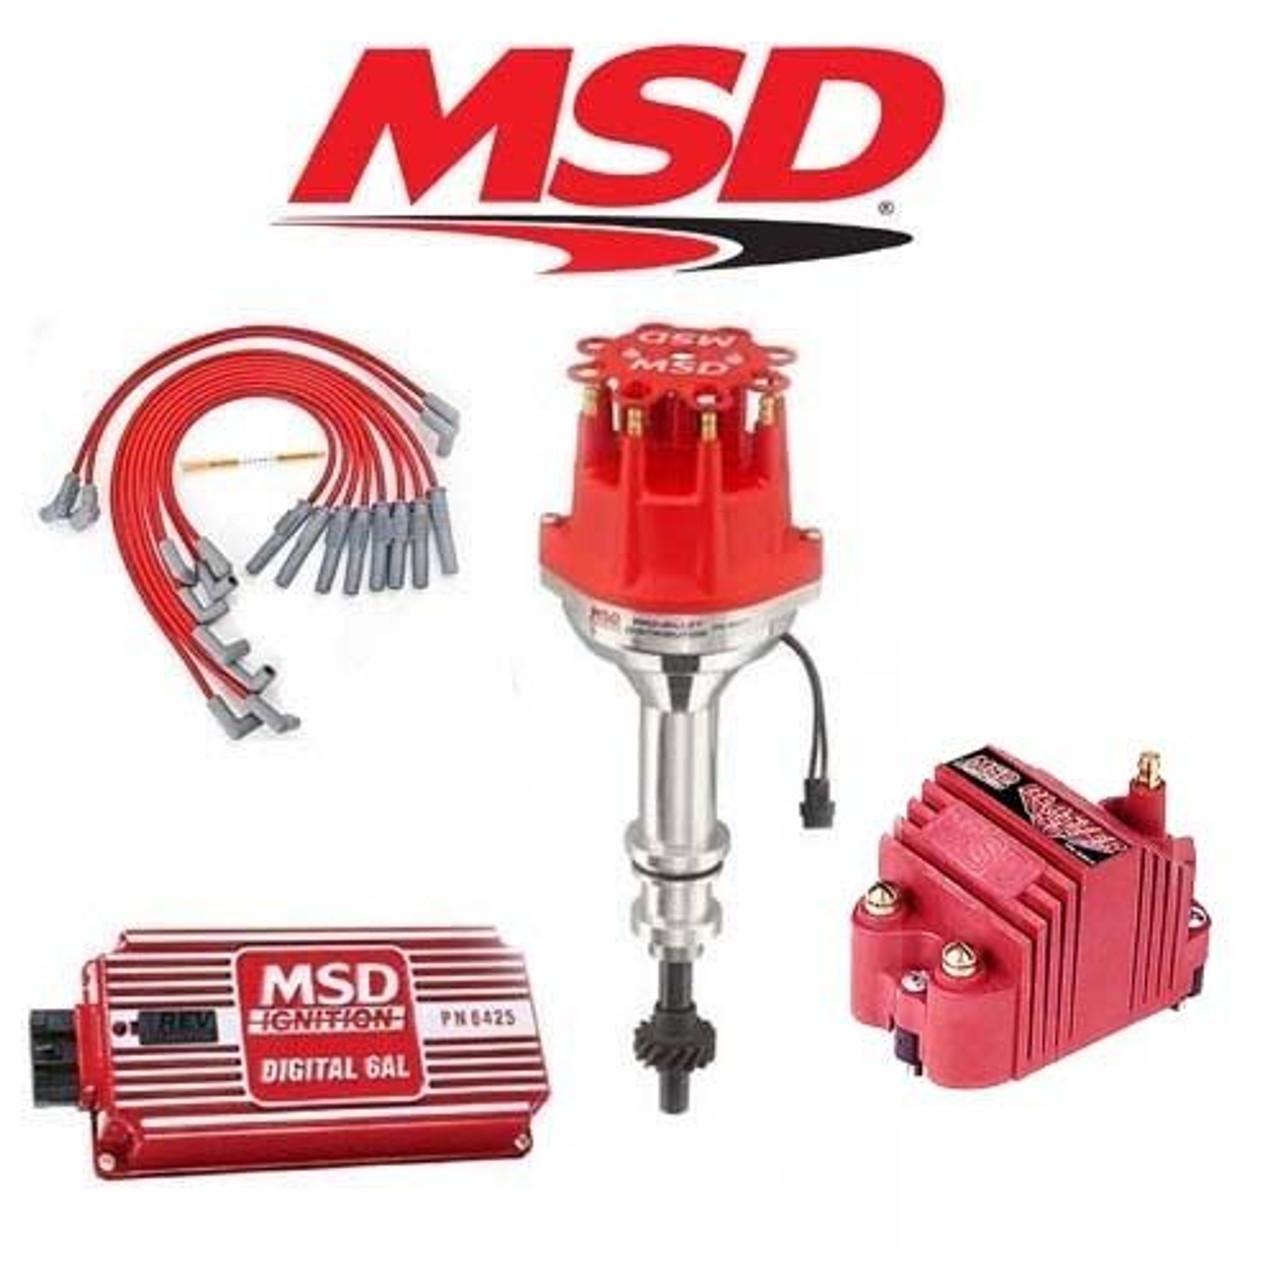 MSD 9120 Ignition Kit Digital 6AL/Distributor/Wires/Coil Ford 289/302 Small Cap